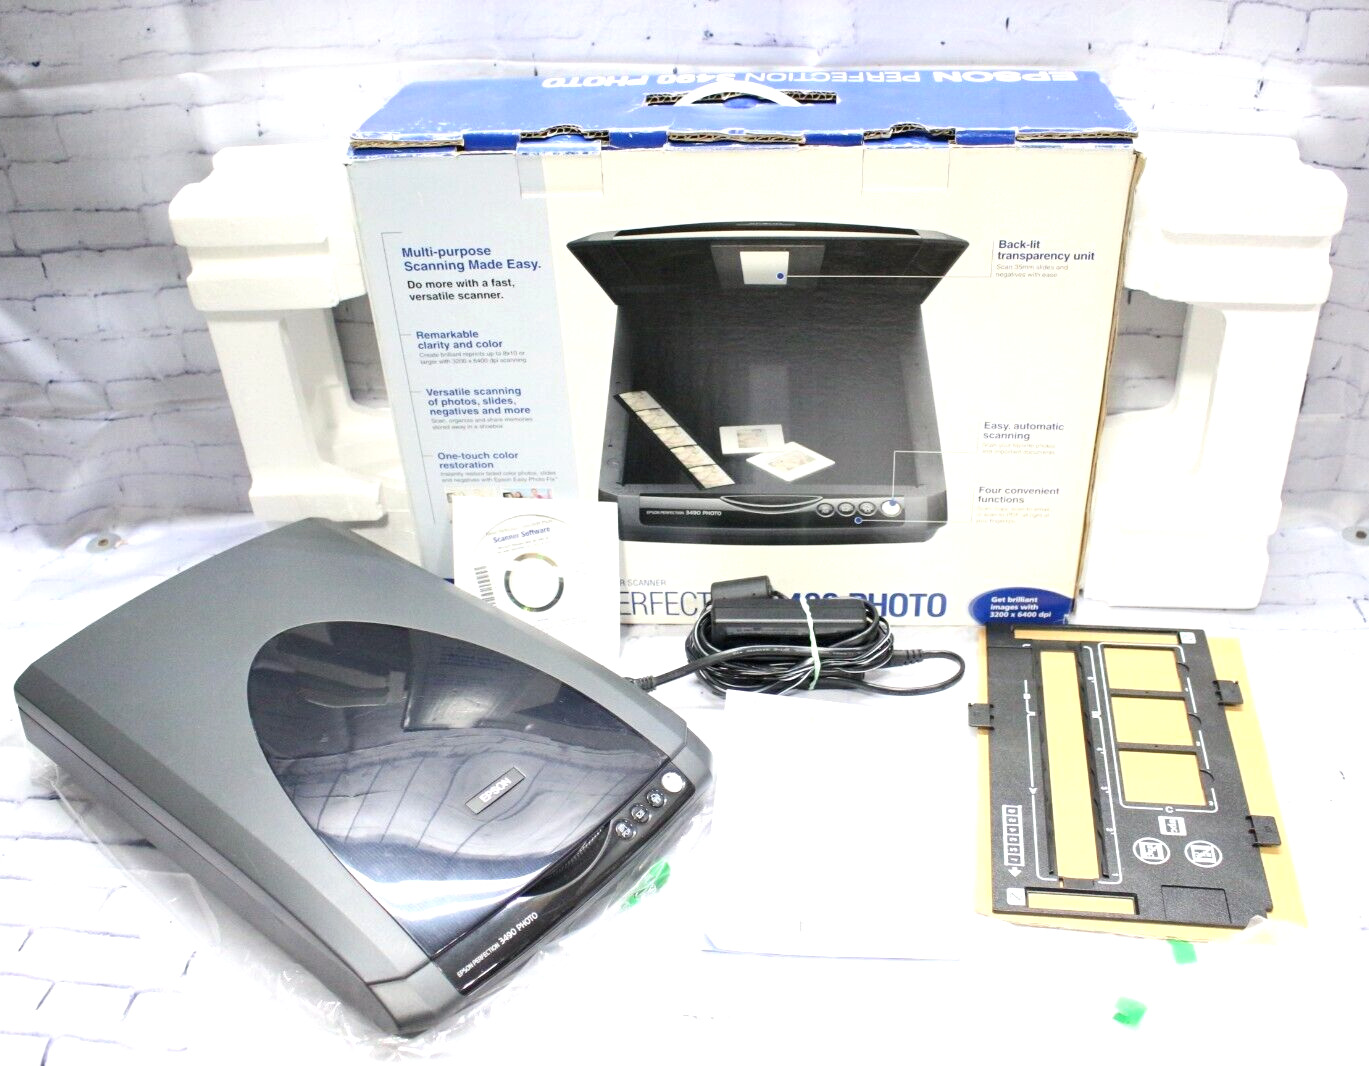 Epson Perfection 3490 Flatbed USB 2.0 Photo Scanner Brand New In Box Some Scratc